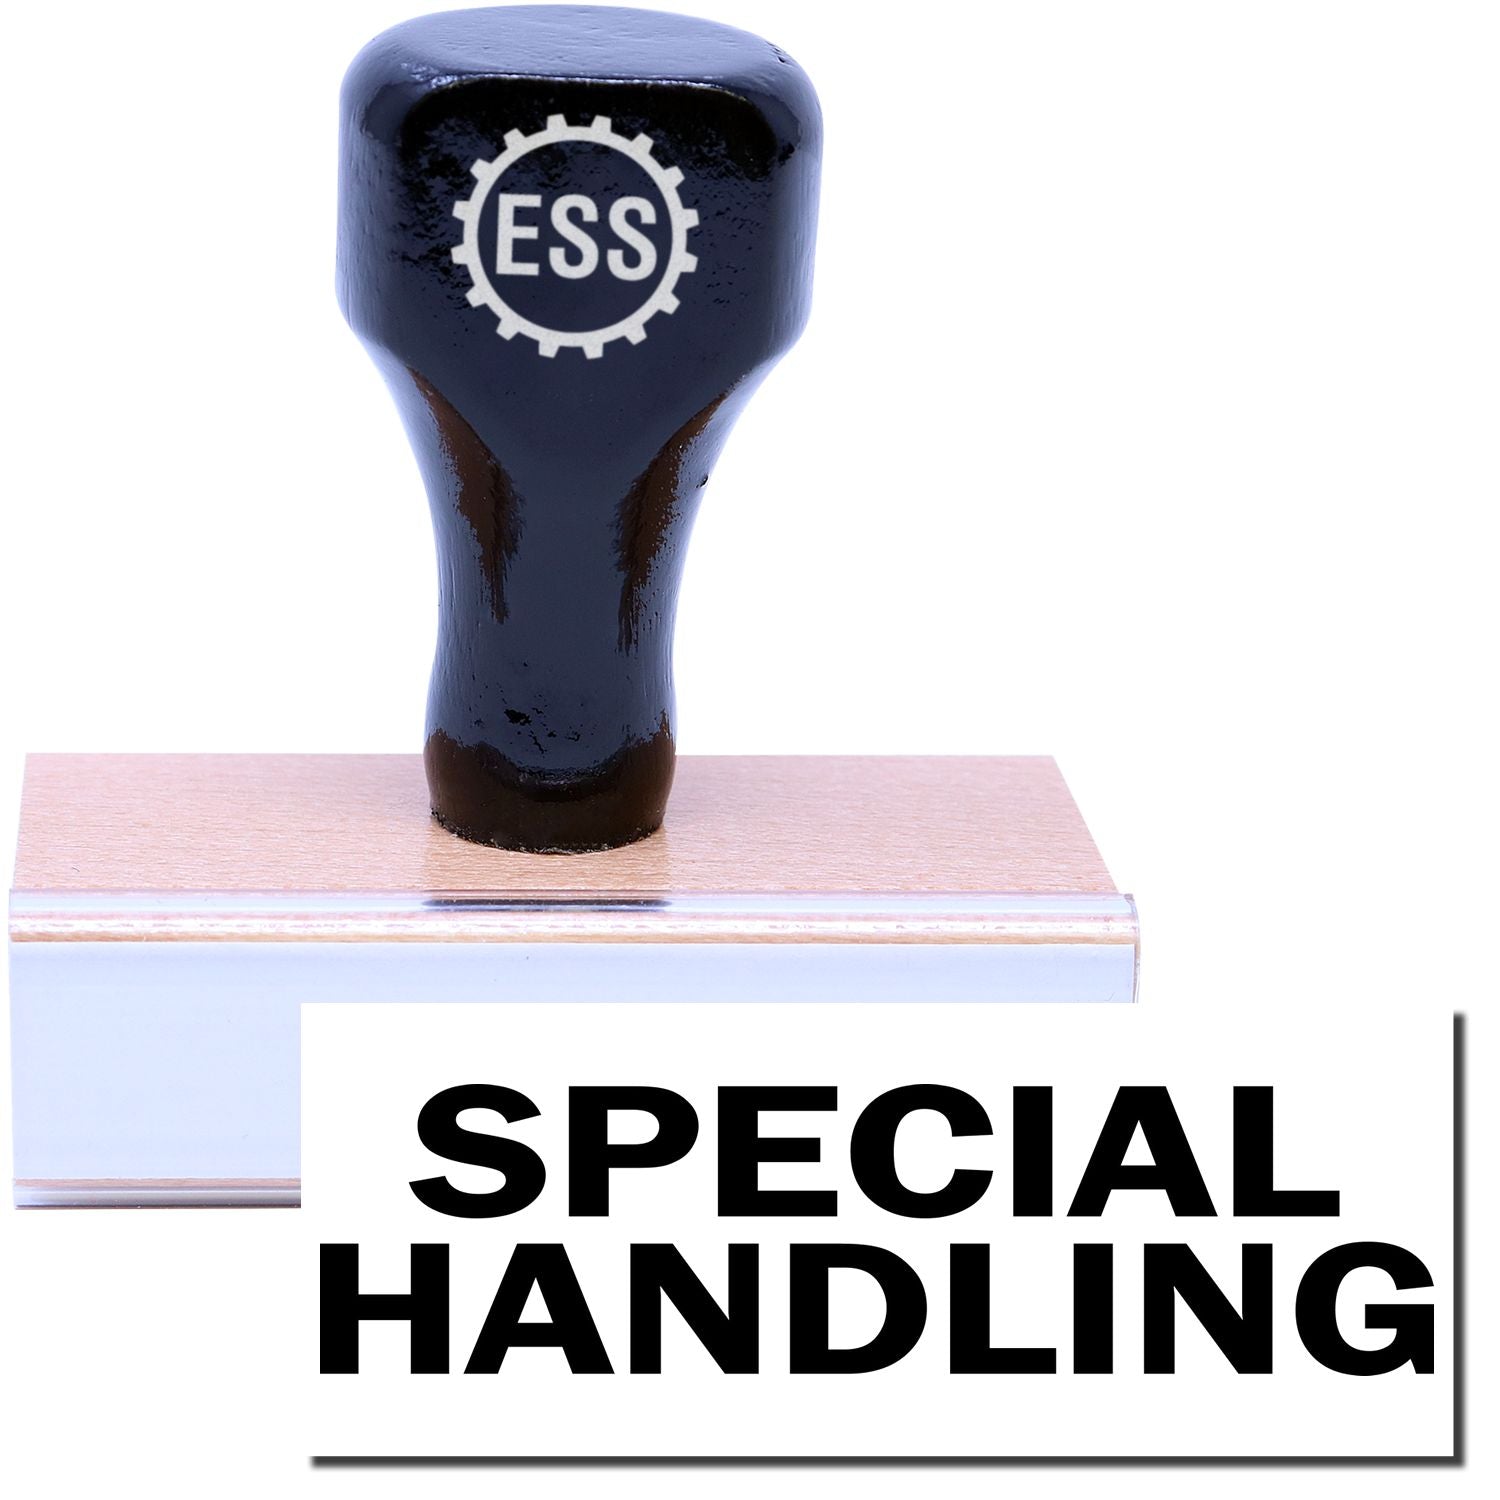 A stock office rubber stamp with a stamped image showing how the text "SPECIAL HANDLING" in a large font is displayed after stamping.